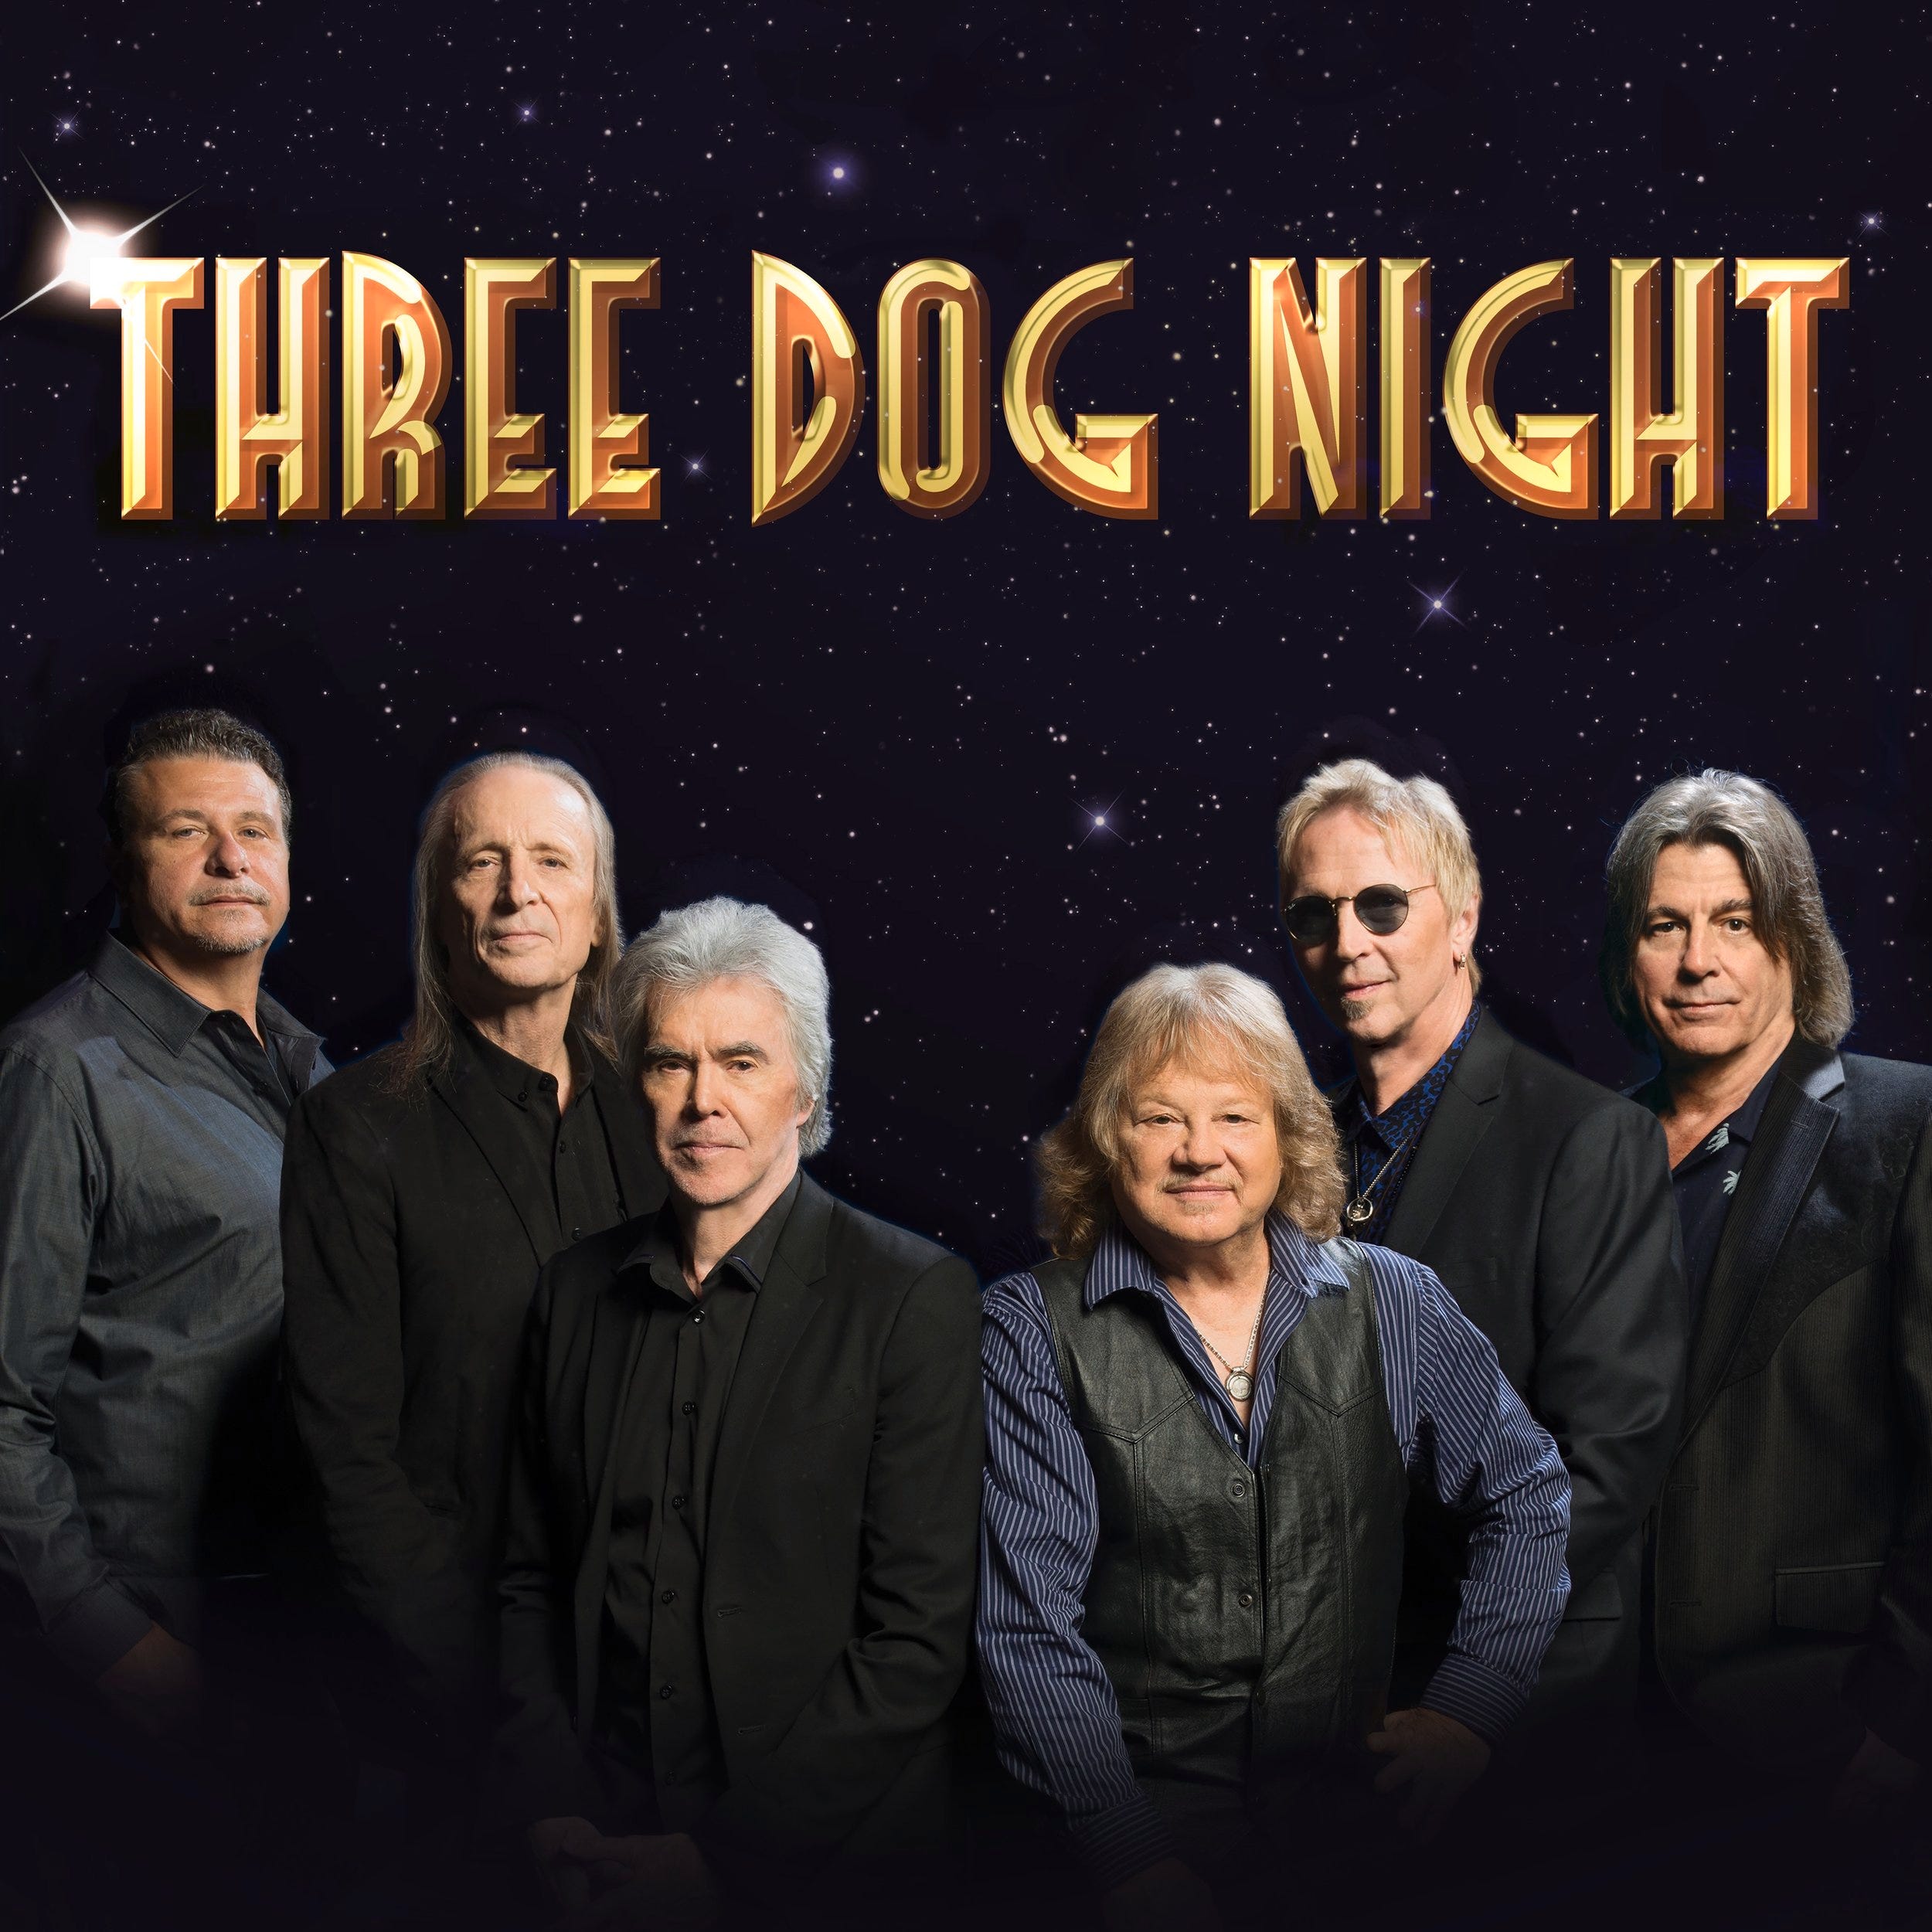 where did the term three dog night come from